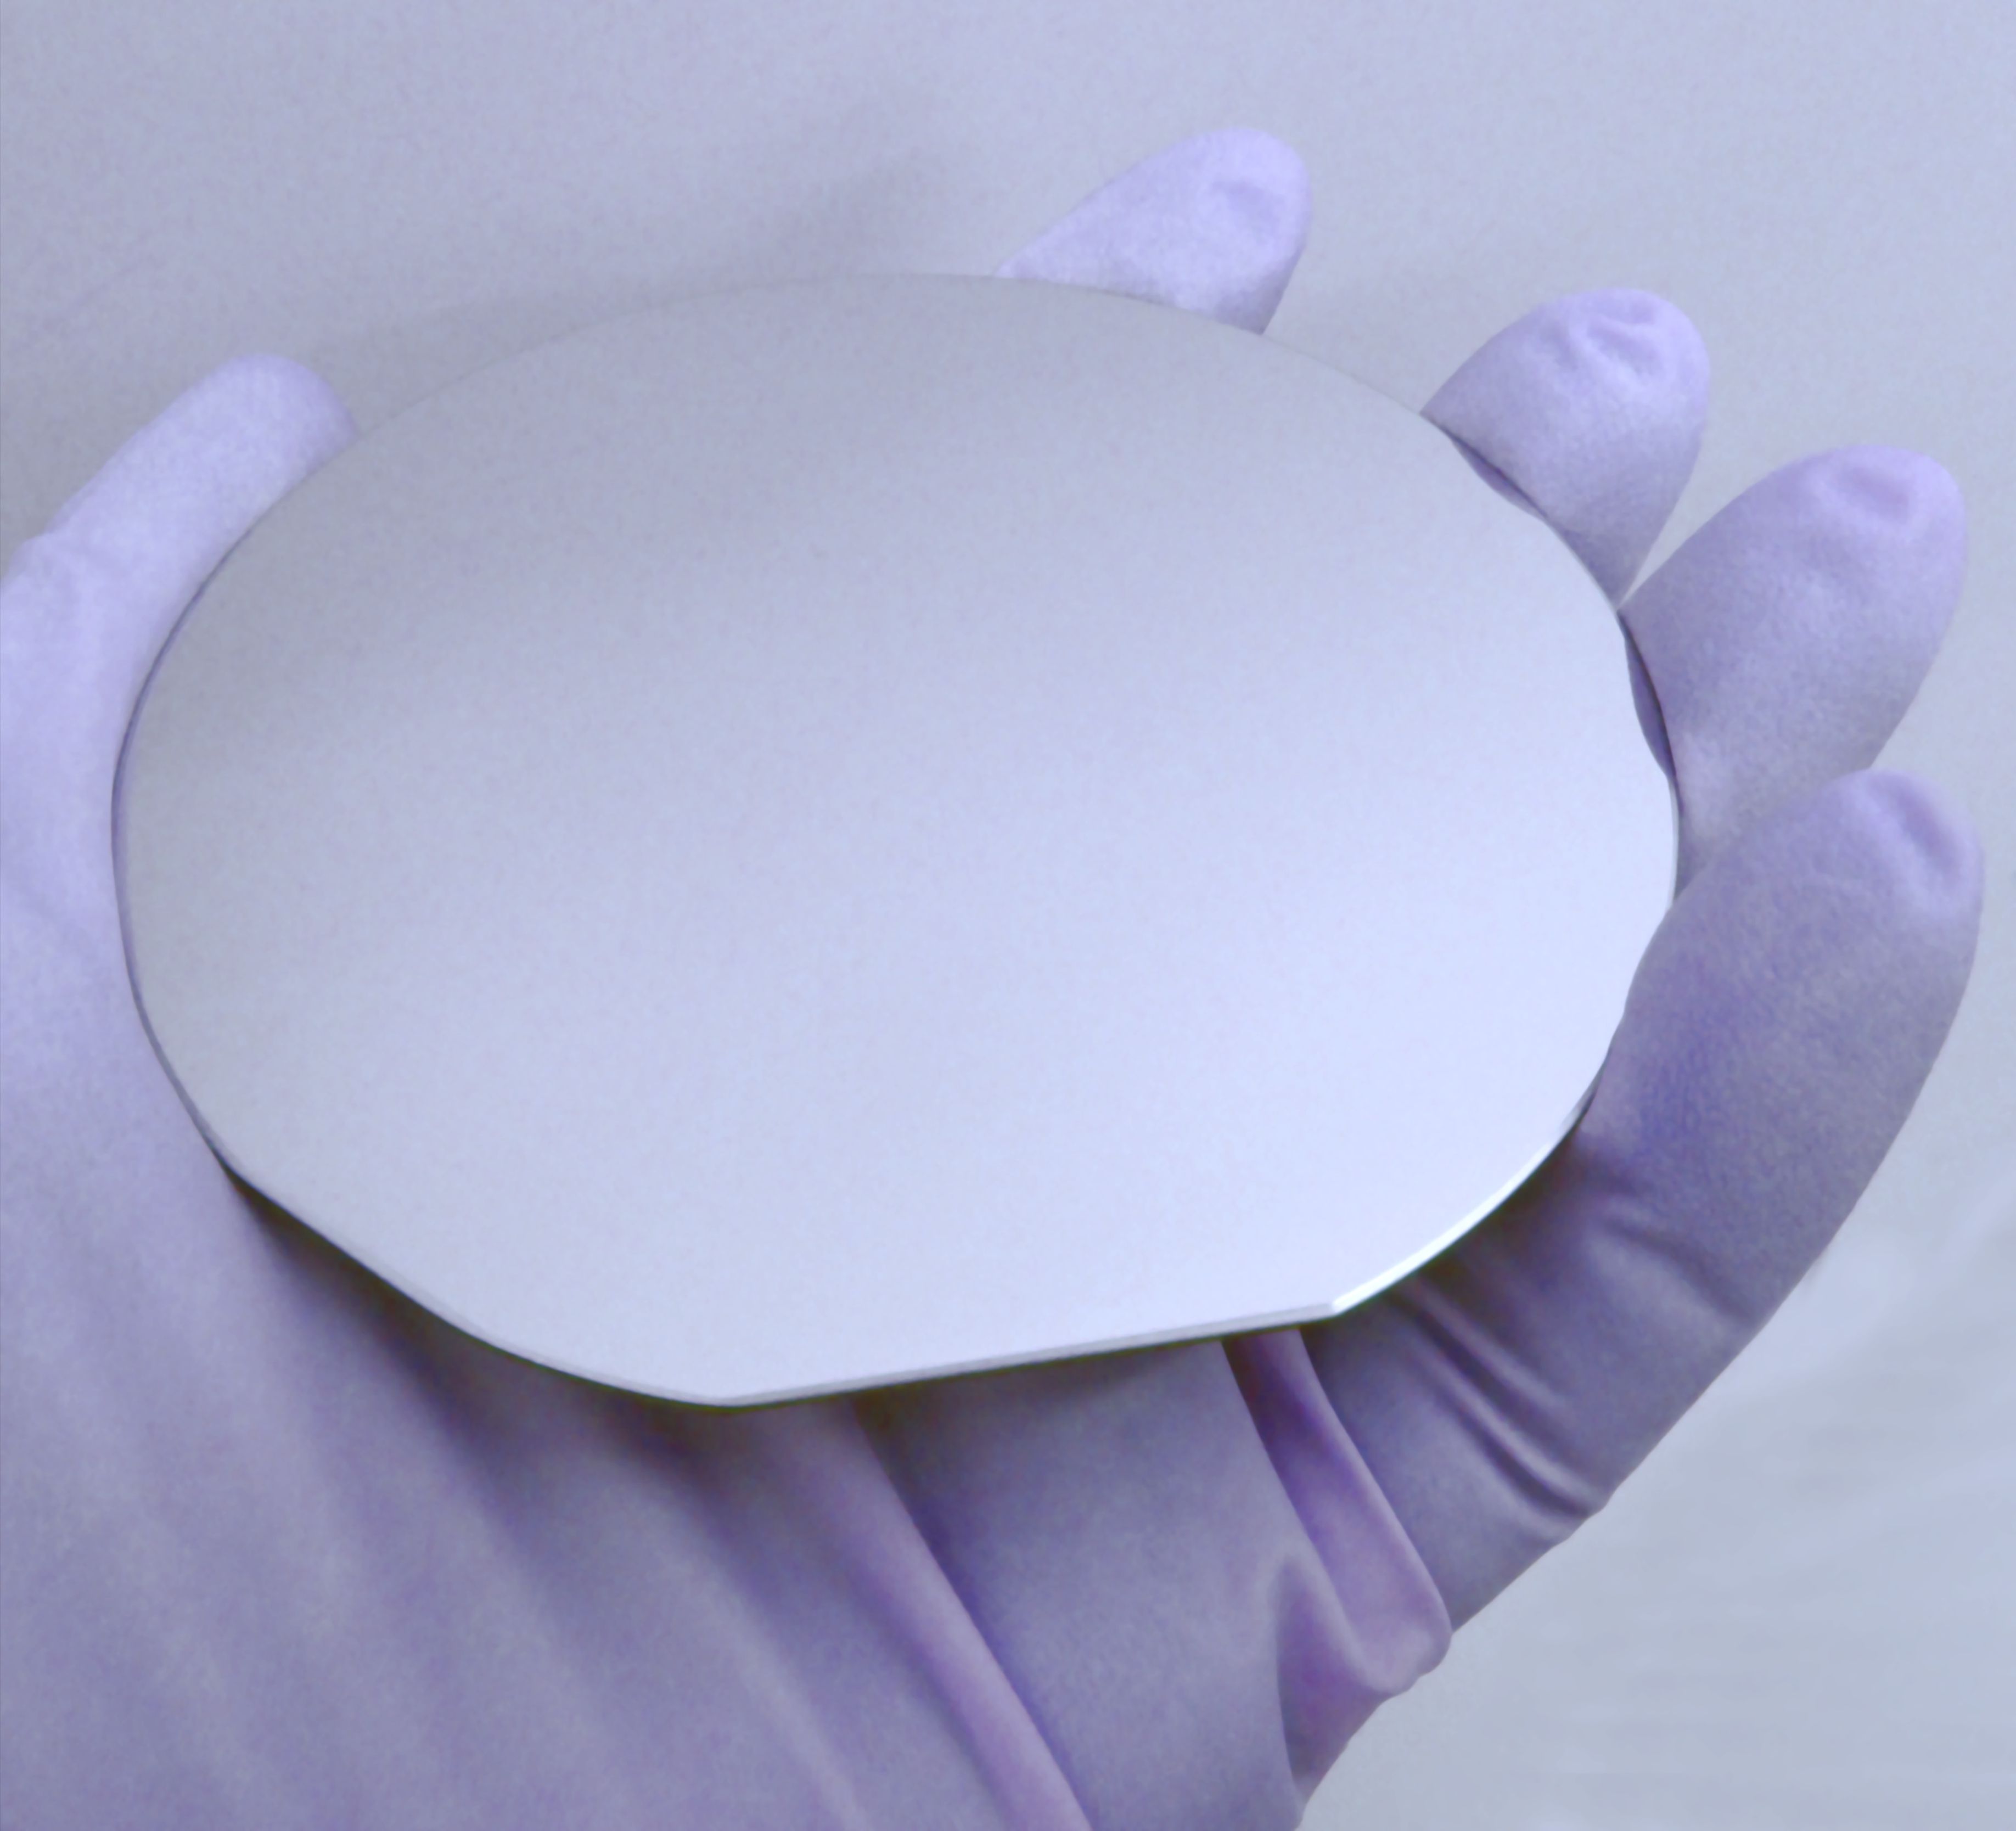 4-inch iridium (111) epitaxial wafer grown on an aluminum nitride/silicon substrate